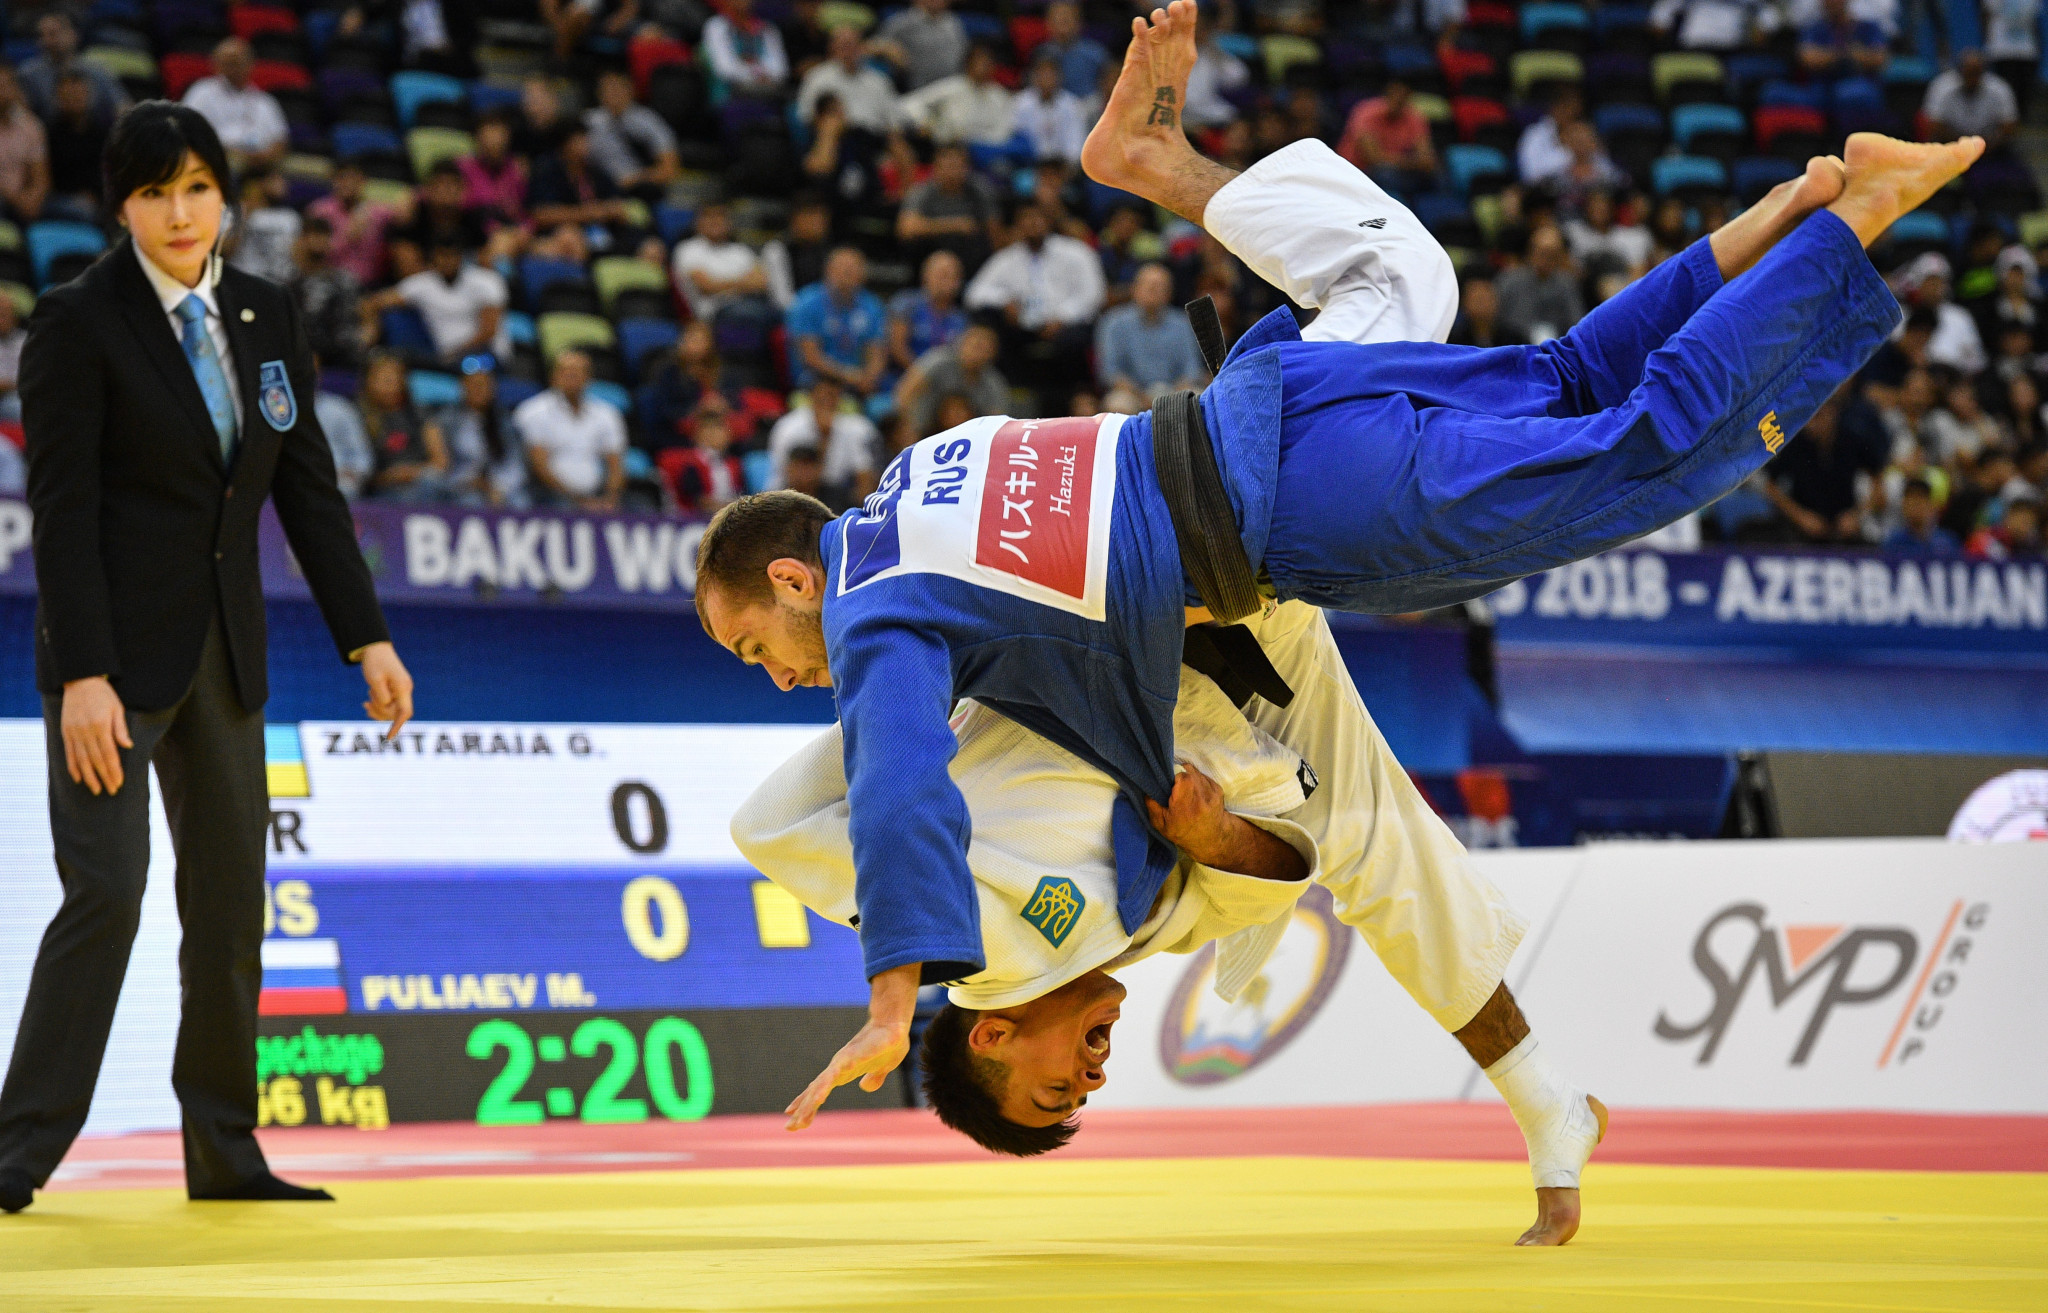 Japanese siblings win double gold on second day of IJF World Championships